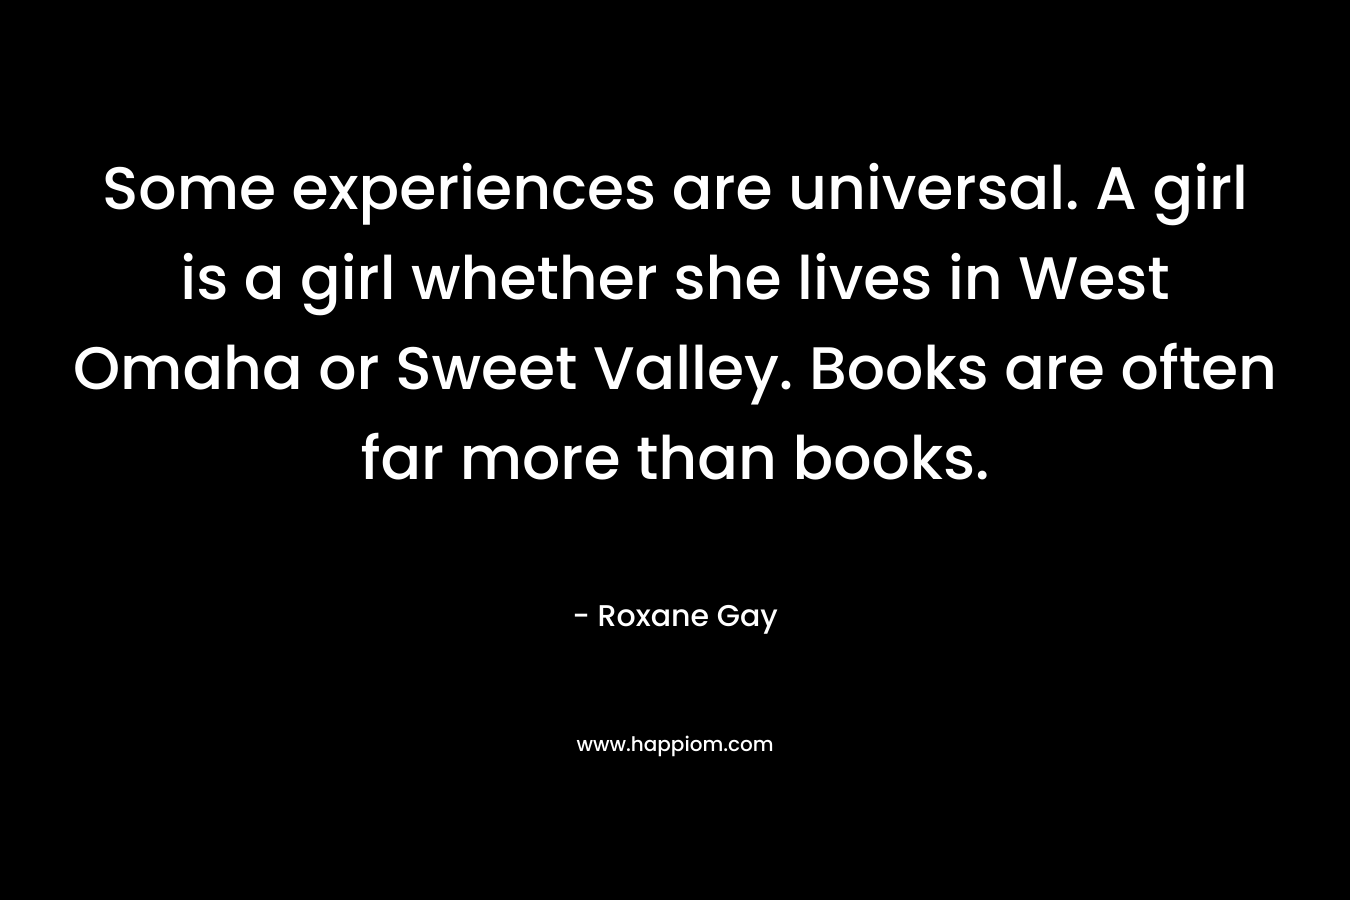 Some experiences are universal. A girl is a girl whether she lives in West Omaha or Sweet Valley. Books are often far more than books.